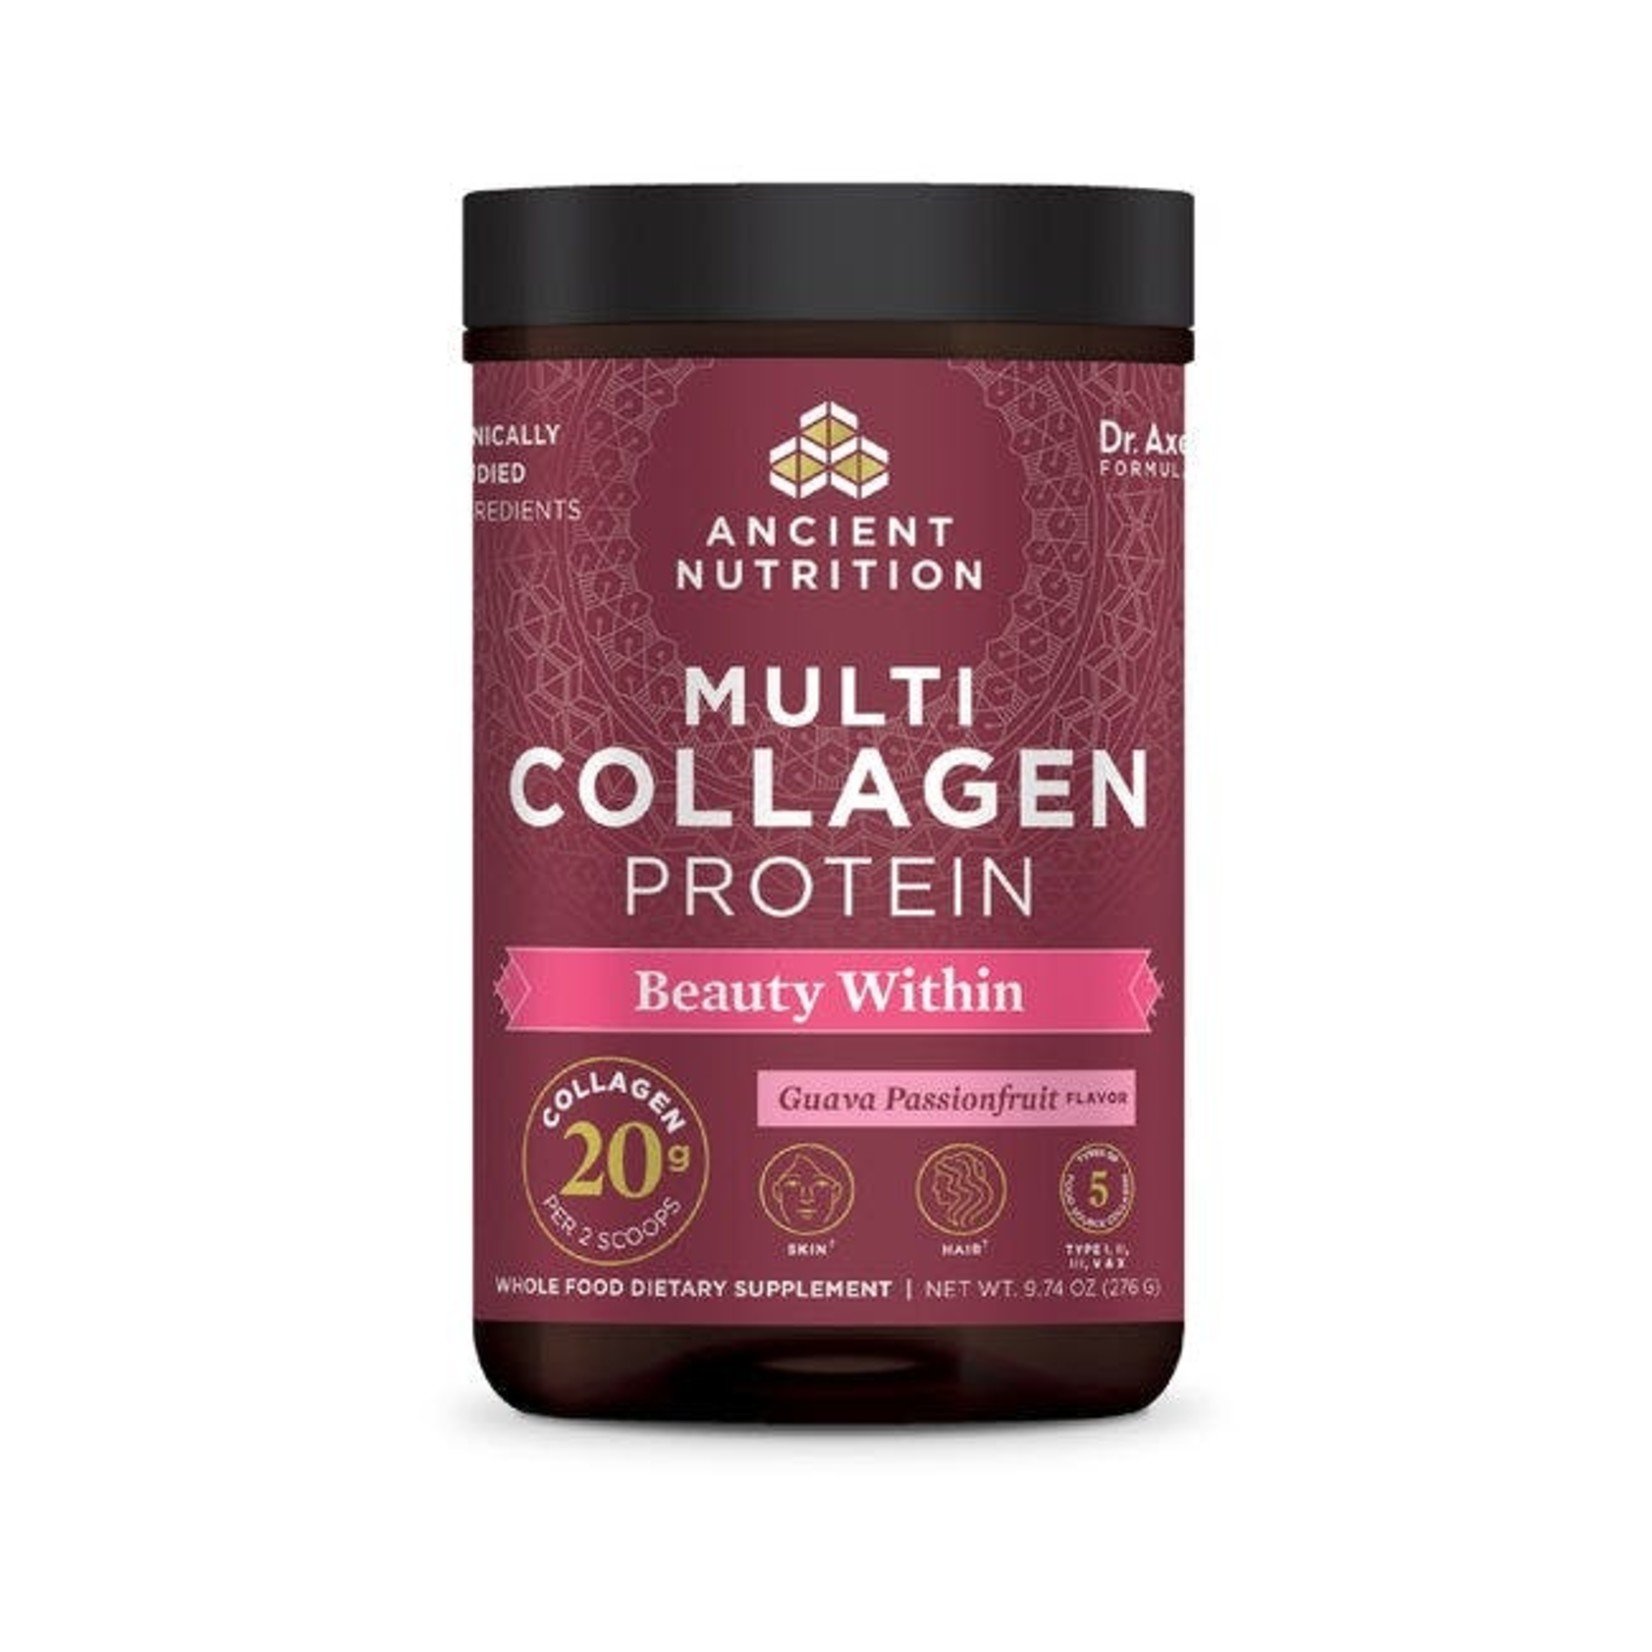 Ancient Nutrition Ancient Nutrition - Multi Collagen Protein Beauty Within - 278 g